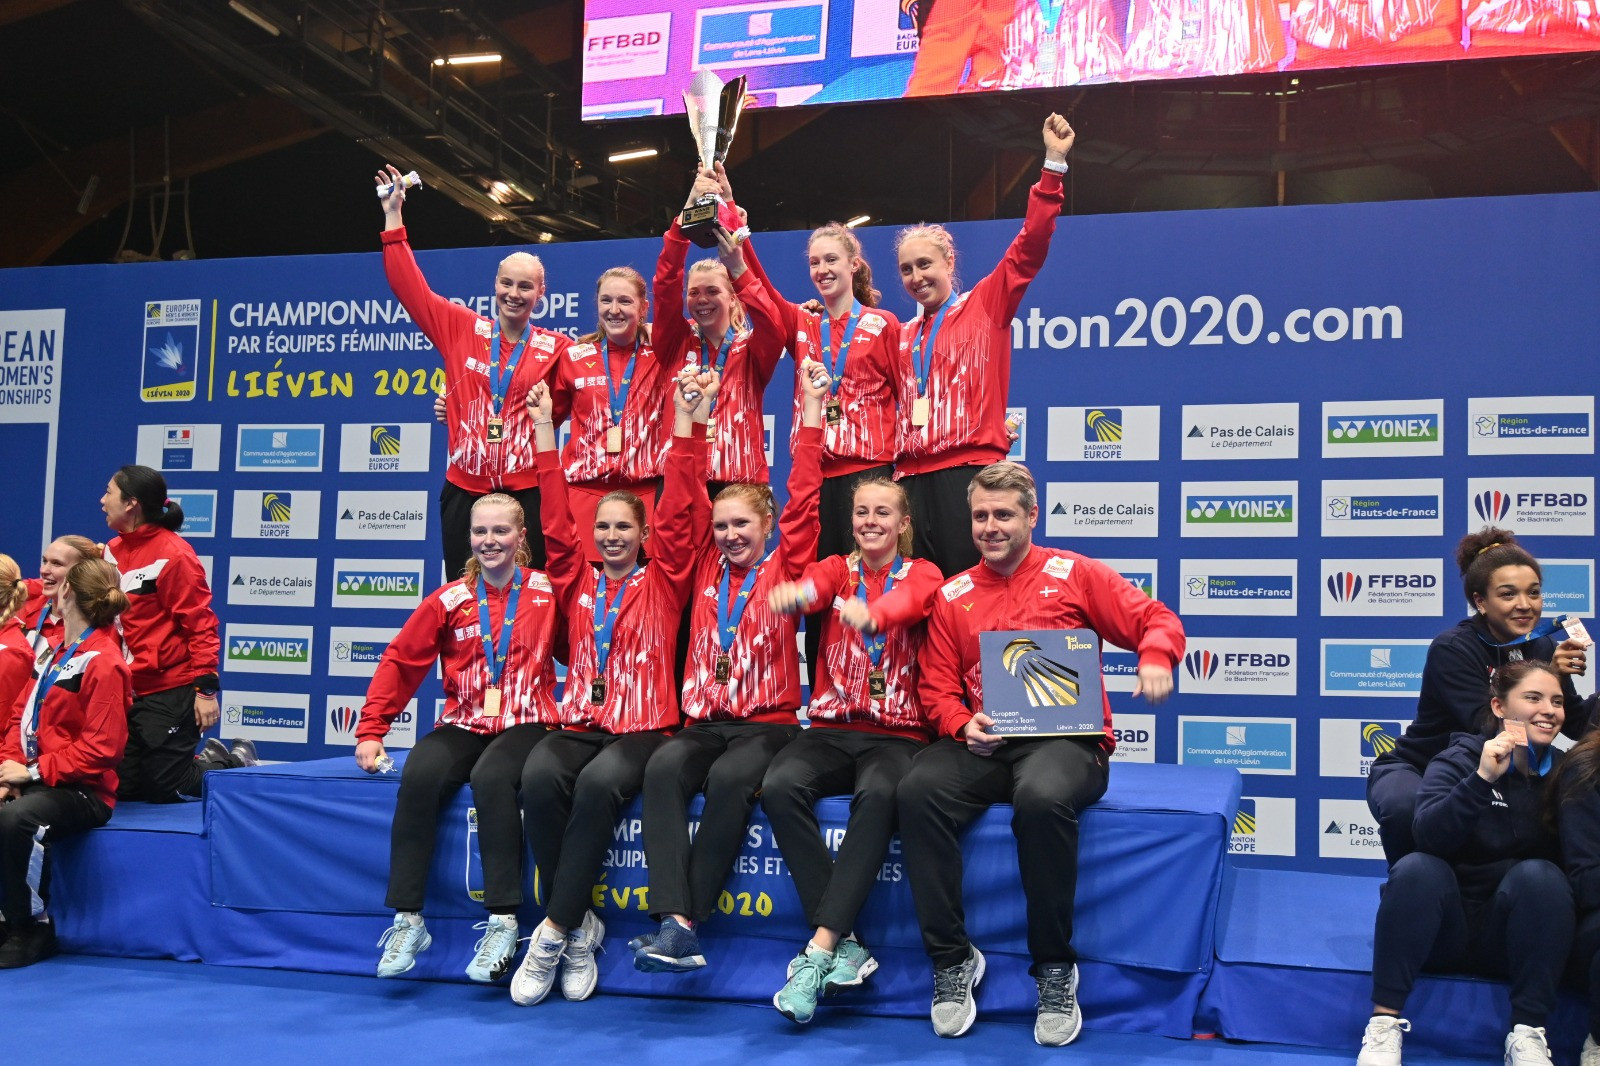 Double delight for Denmark as they take men's and women's titles at European Team Badminton Championships